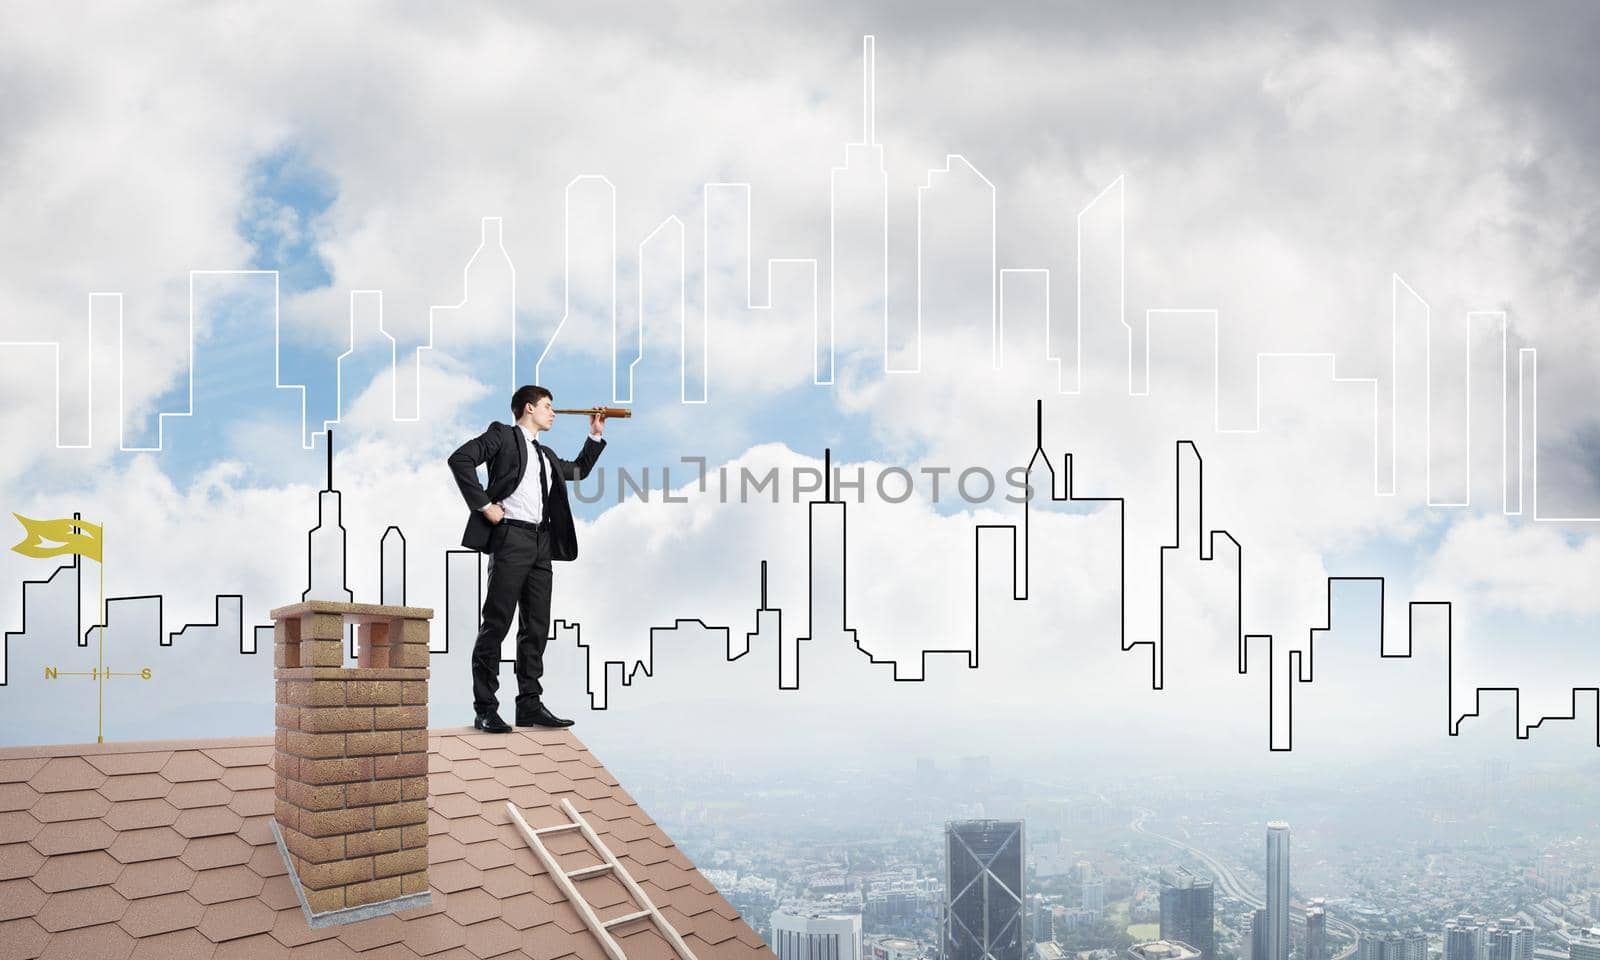 Young businessman in suit on roof edge. Mixed media